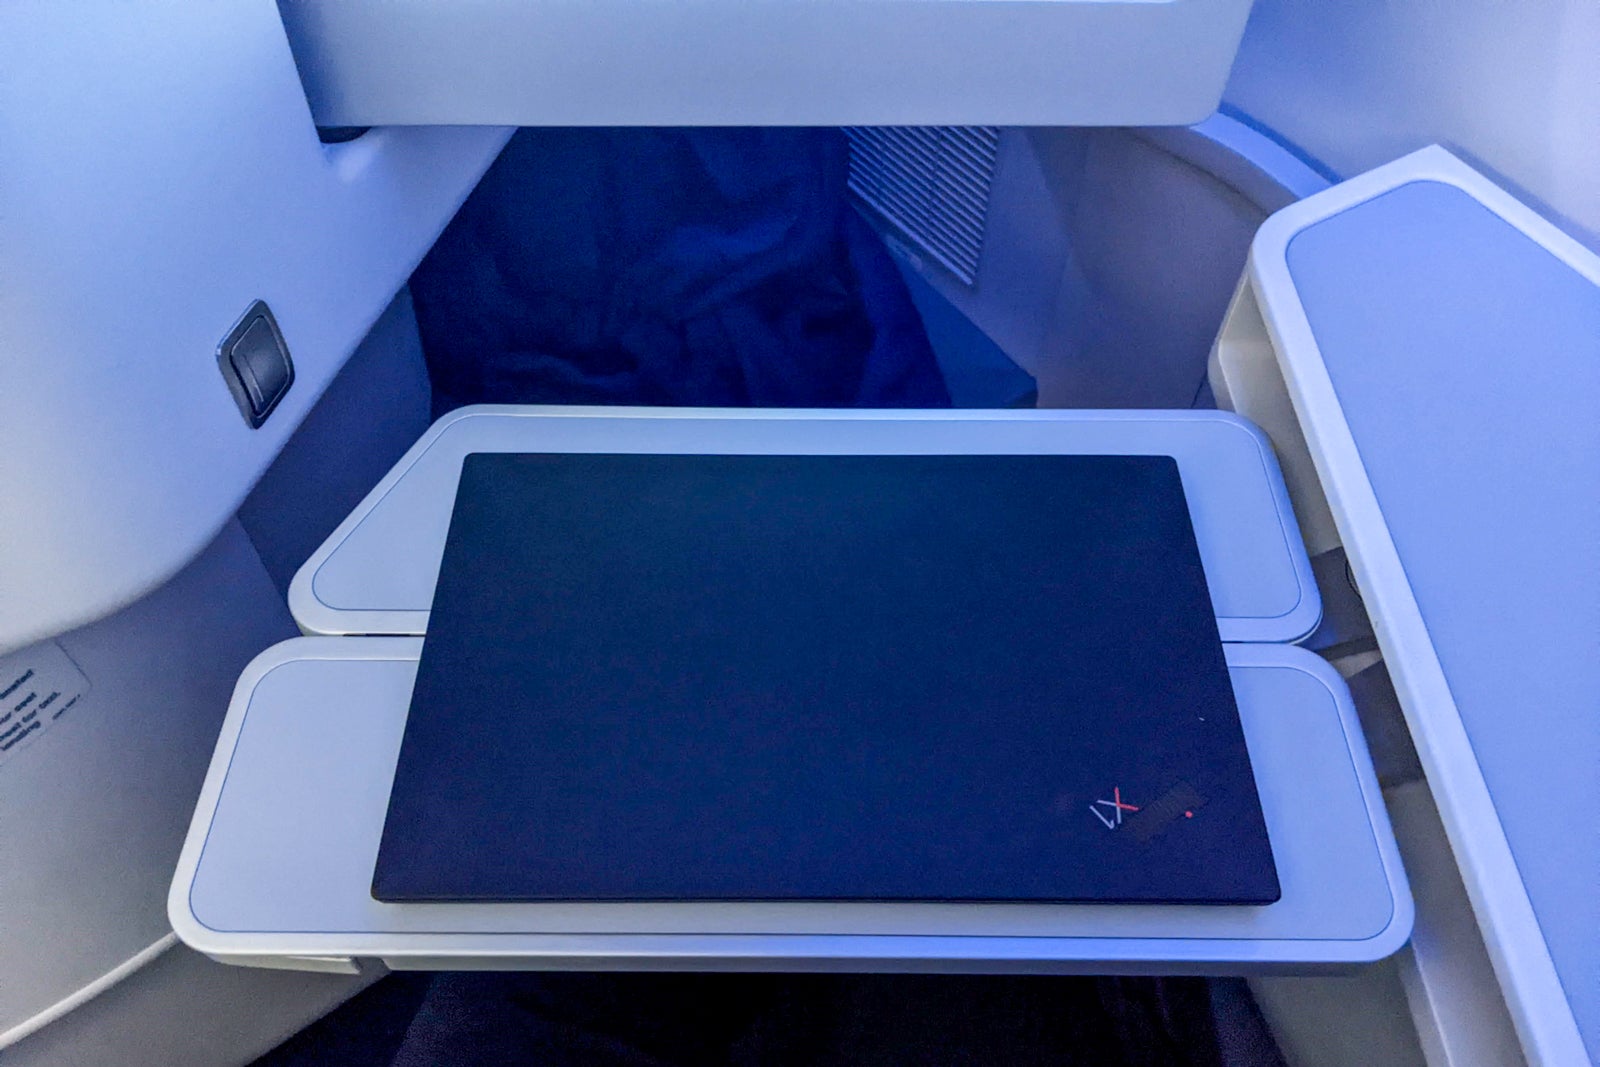 Tray table size